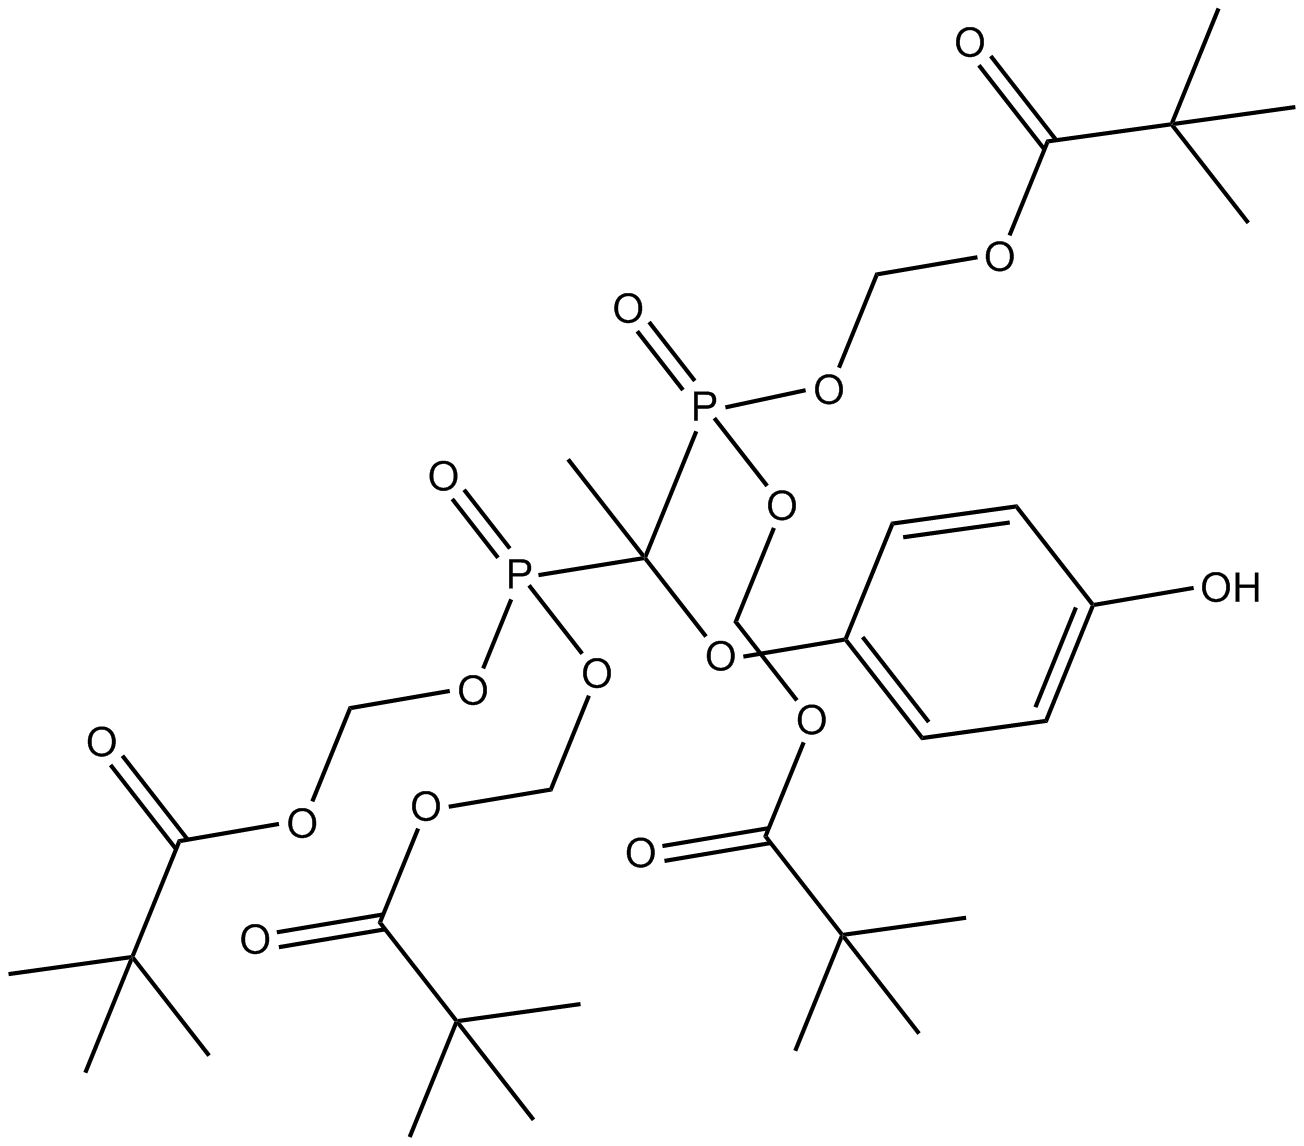 L-690,488  Chemical Structure